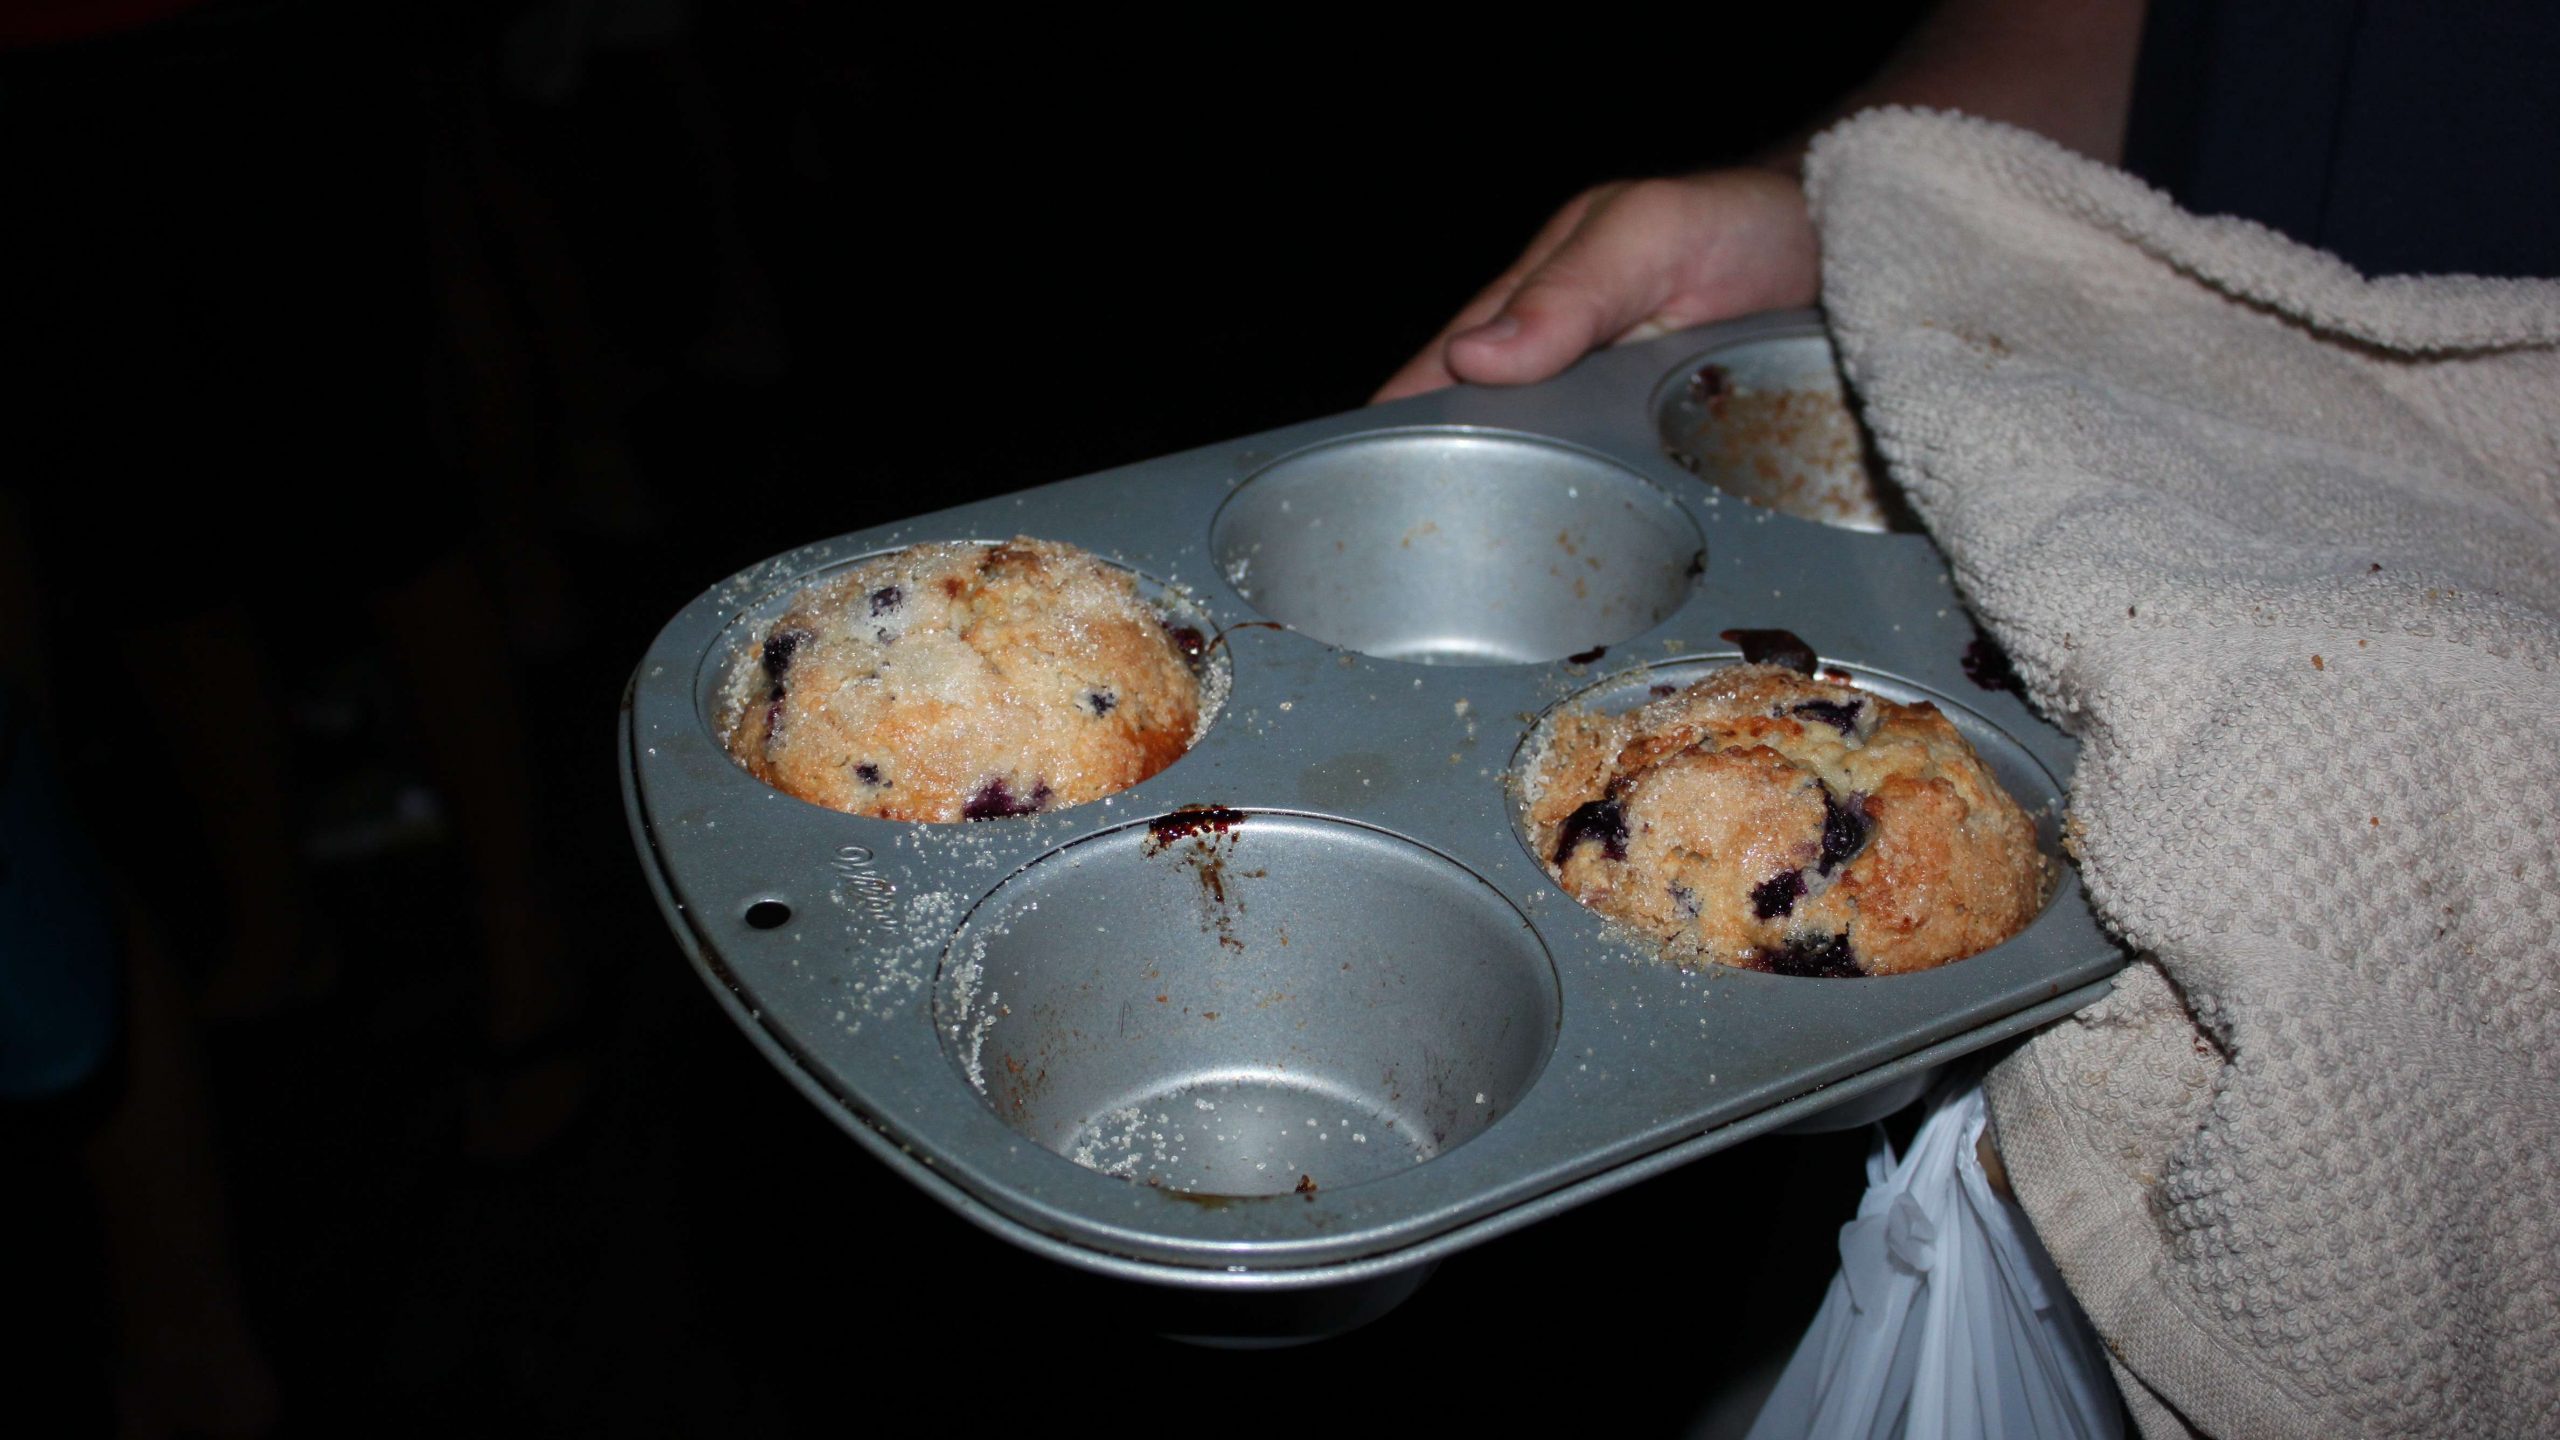 Someone brought homemade blueberry muffins for the anglers to enjoy.